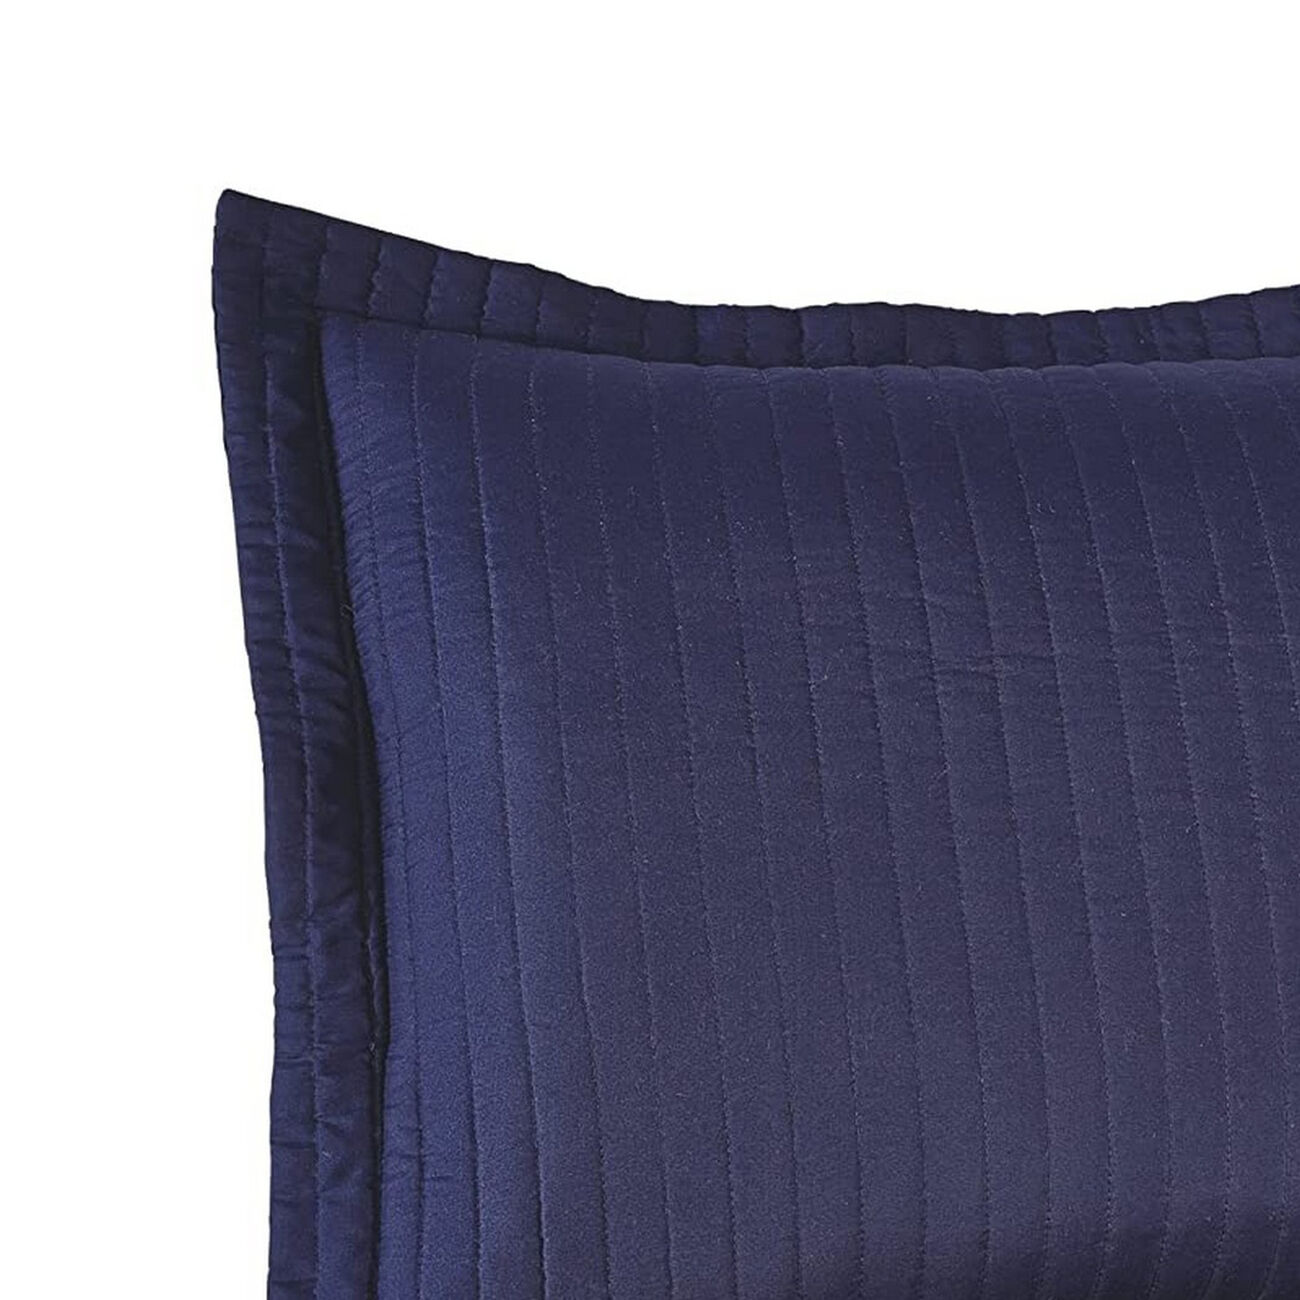 3 Piece Queen Coverlet Set with Vertical Channel Stitching, Navy Blue